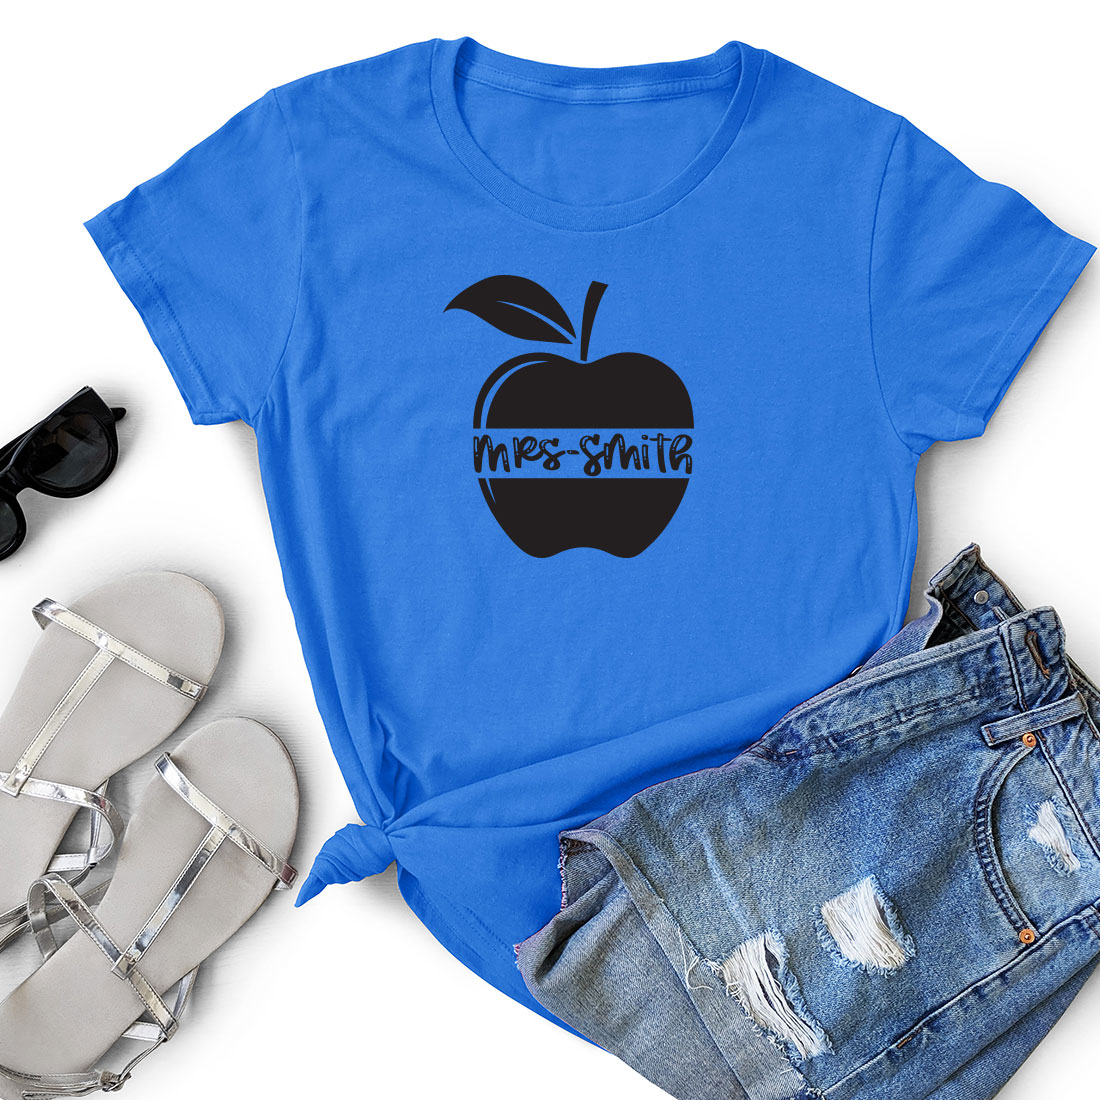 Blue t - shirt with an apple and a pair of shorts.